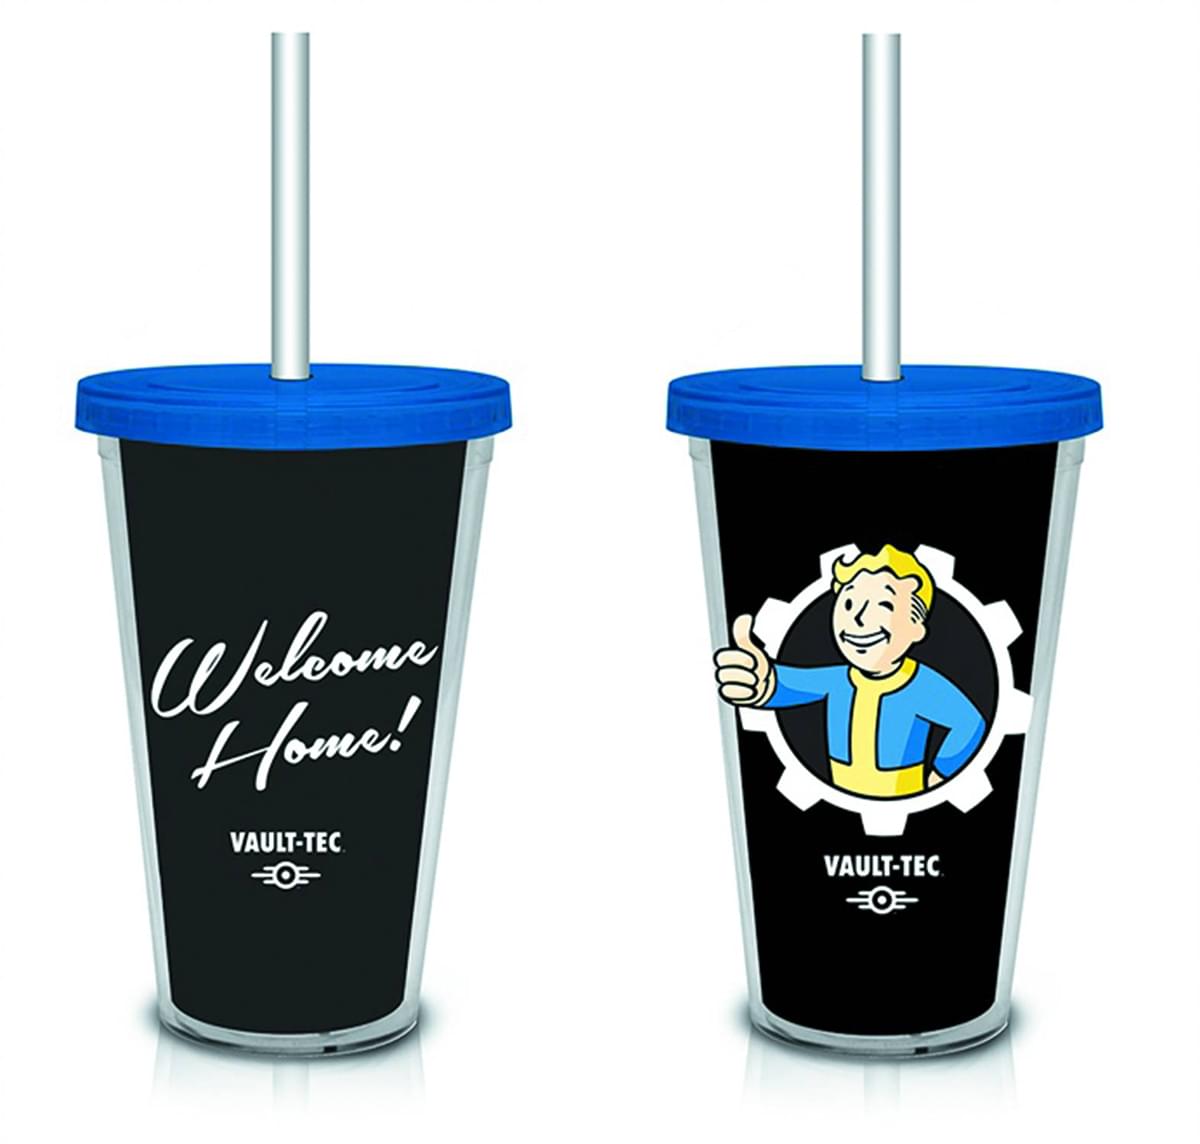 Fallout "Welcome Home" Vault-Tec (Black) 18oz. Travel Cup with Straw